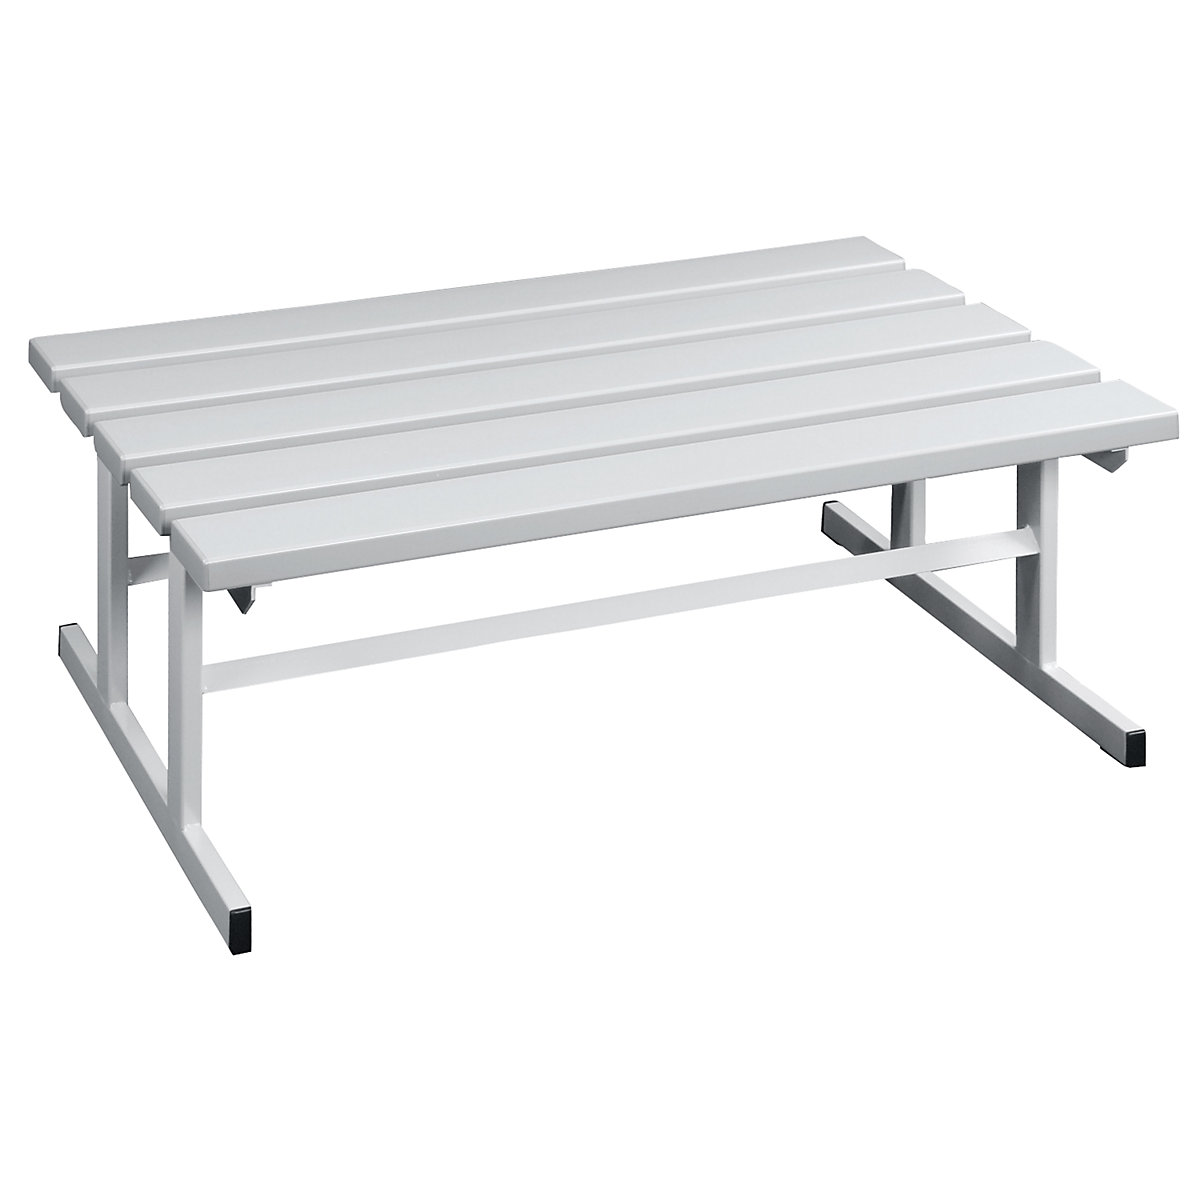 Wolf – Cloakroom bench